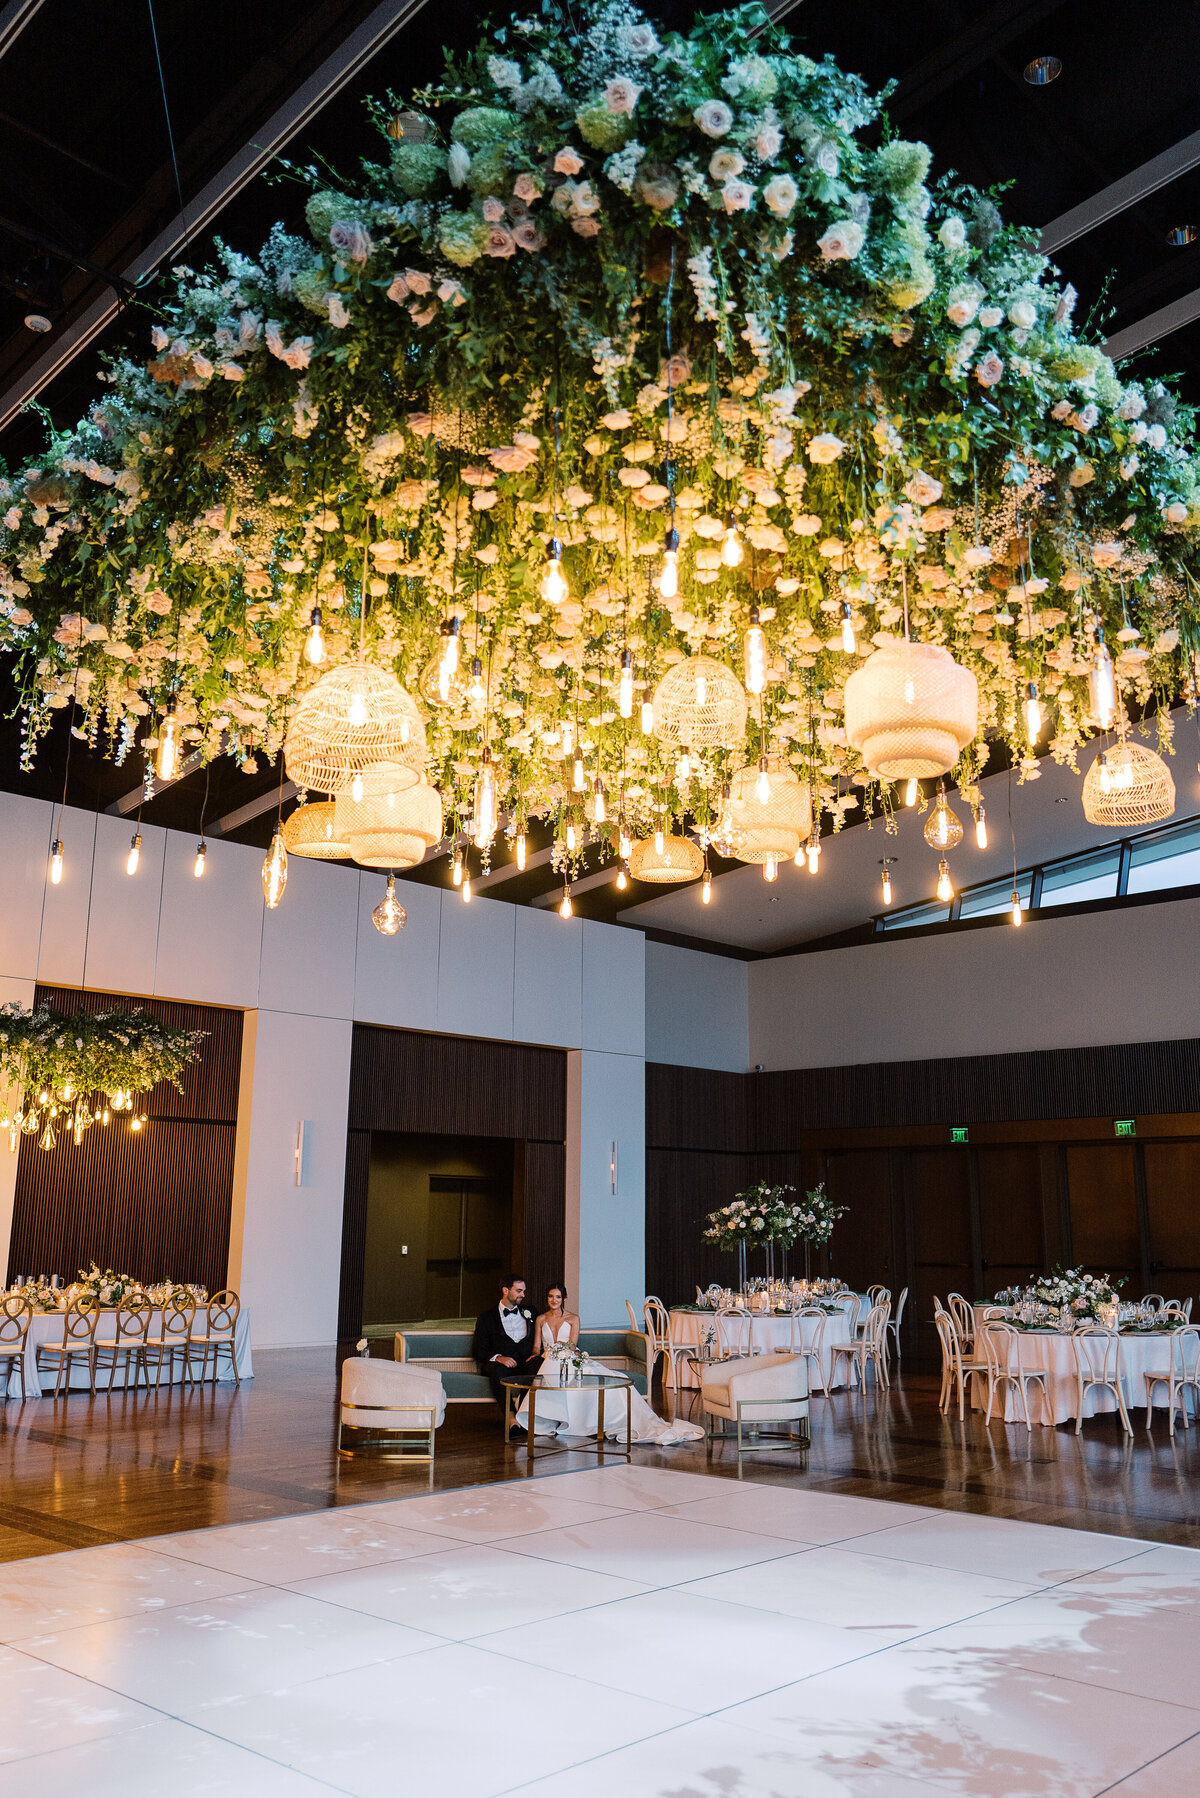 Large dance floor floral installation for classic summer wedding in downtown Nashville. Timeless floral design highlights this garden-inspired wedding reception. Hanging flowers and rattan chandeliers create lush floral dance floor moment. Classic white and green wedding with floral colors in cream, white, taupe, and champagne. Summer floral design full of roses, ranunculus, hydrangea, cosmos, and lisianthis. Design by Rosemary & Finch Floral Design.